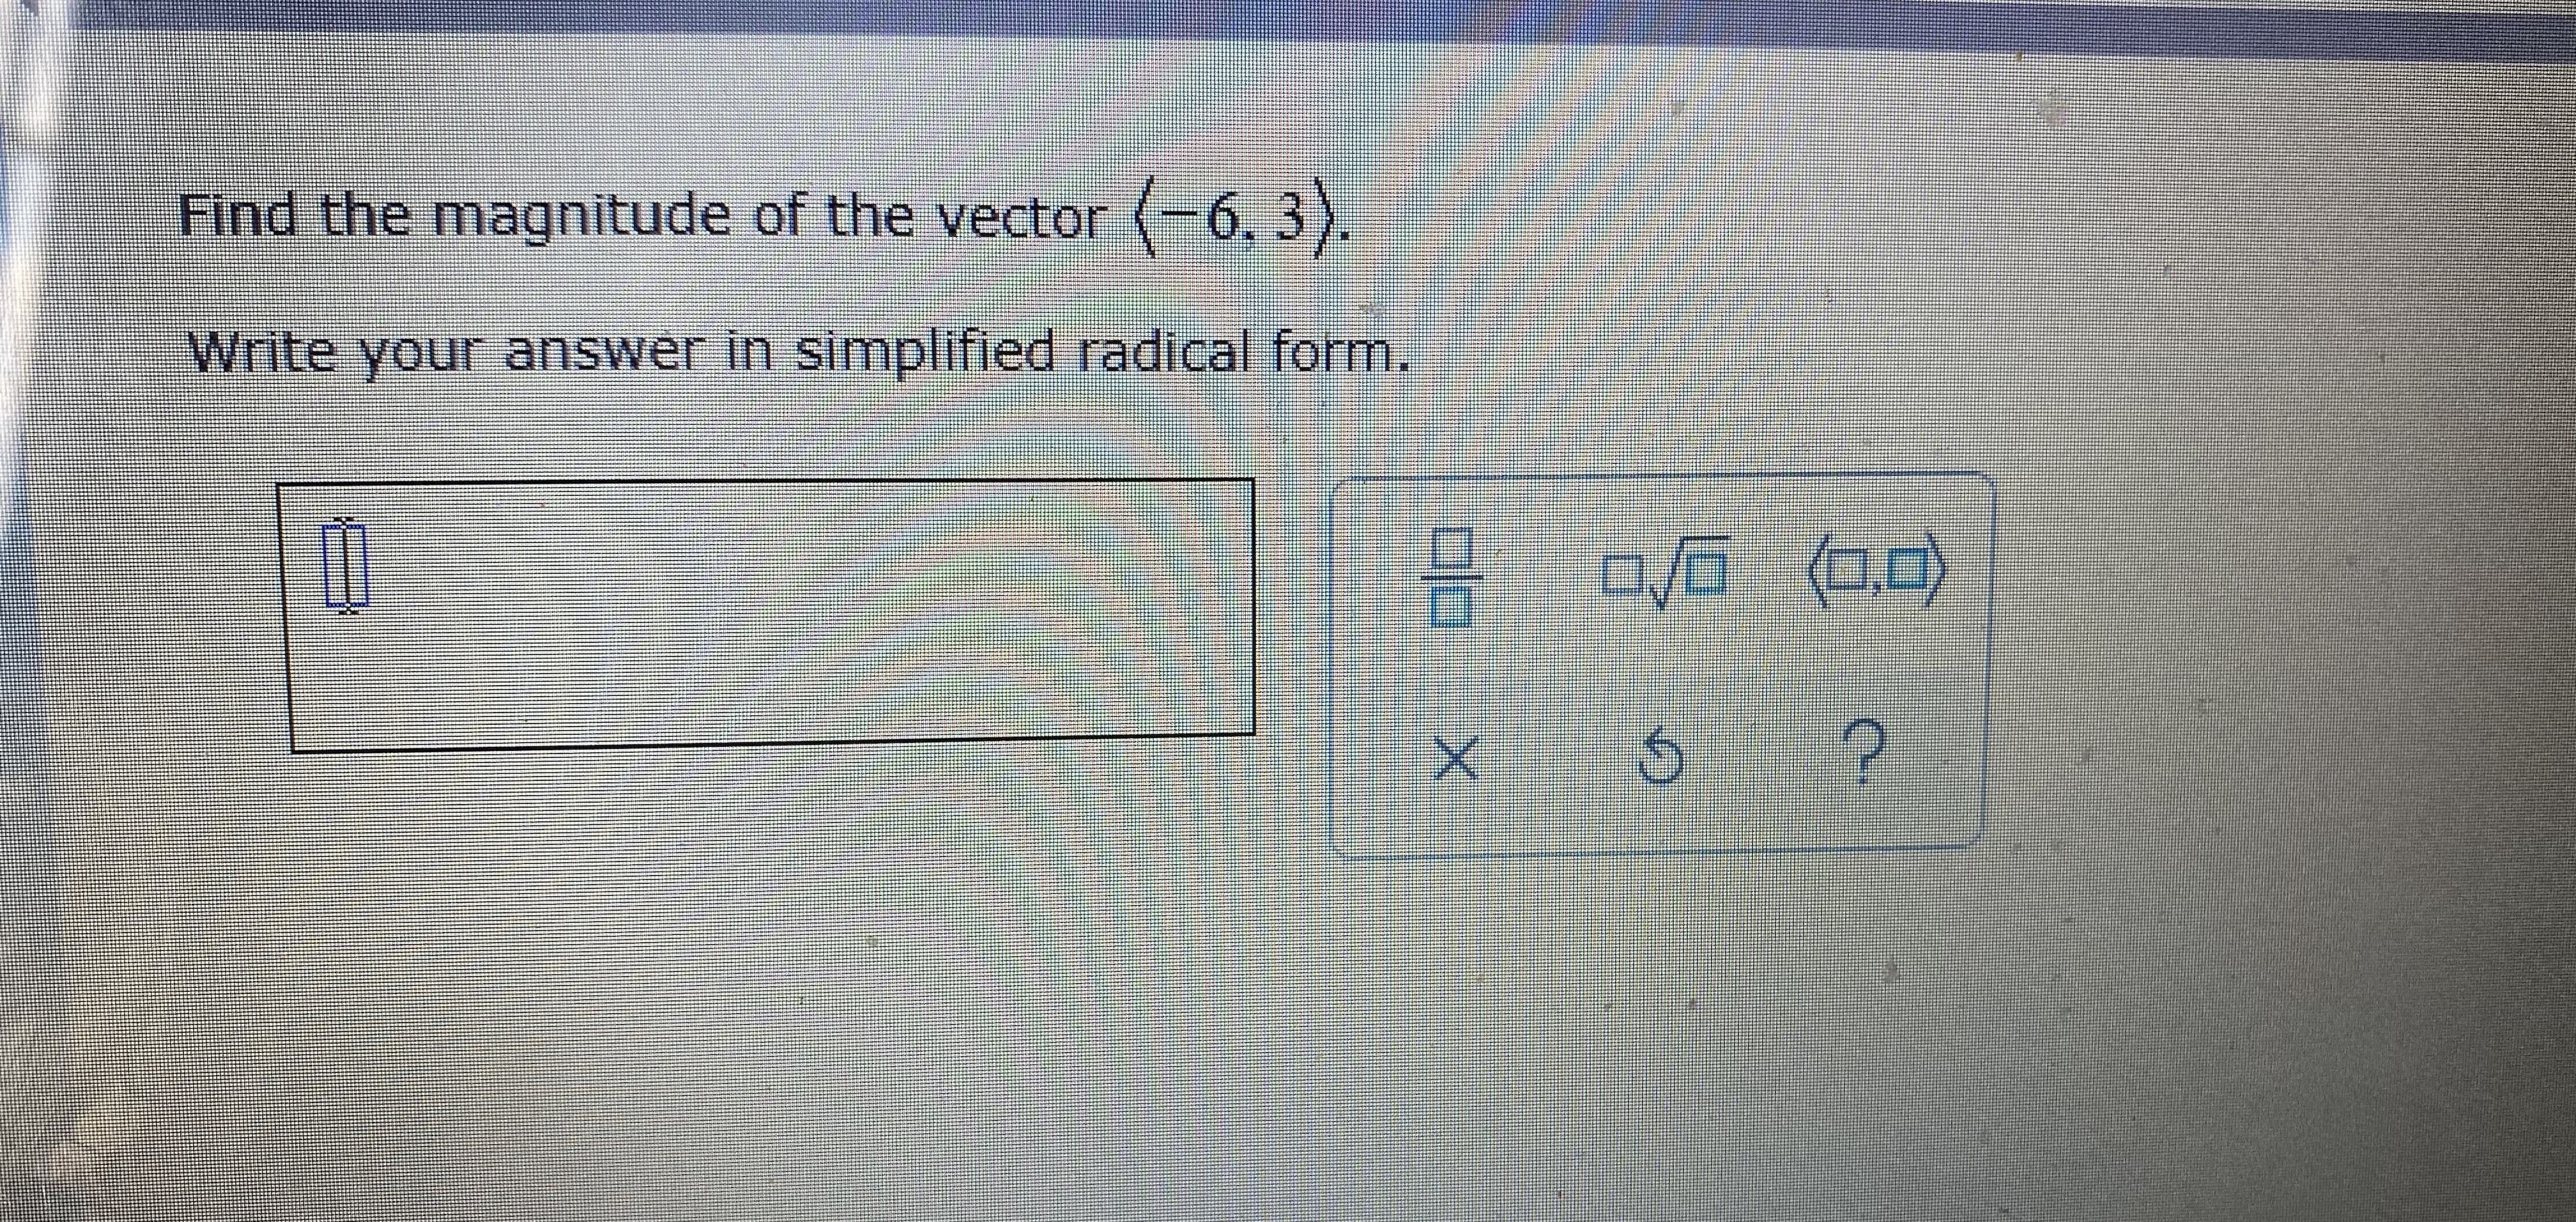 Find the magnitude of the vector
(-6, 3).
Write your answer in simplified radical form.
